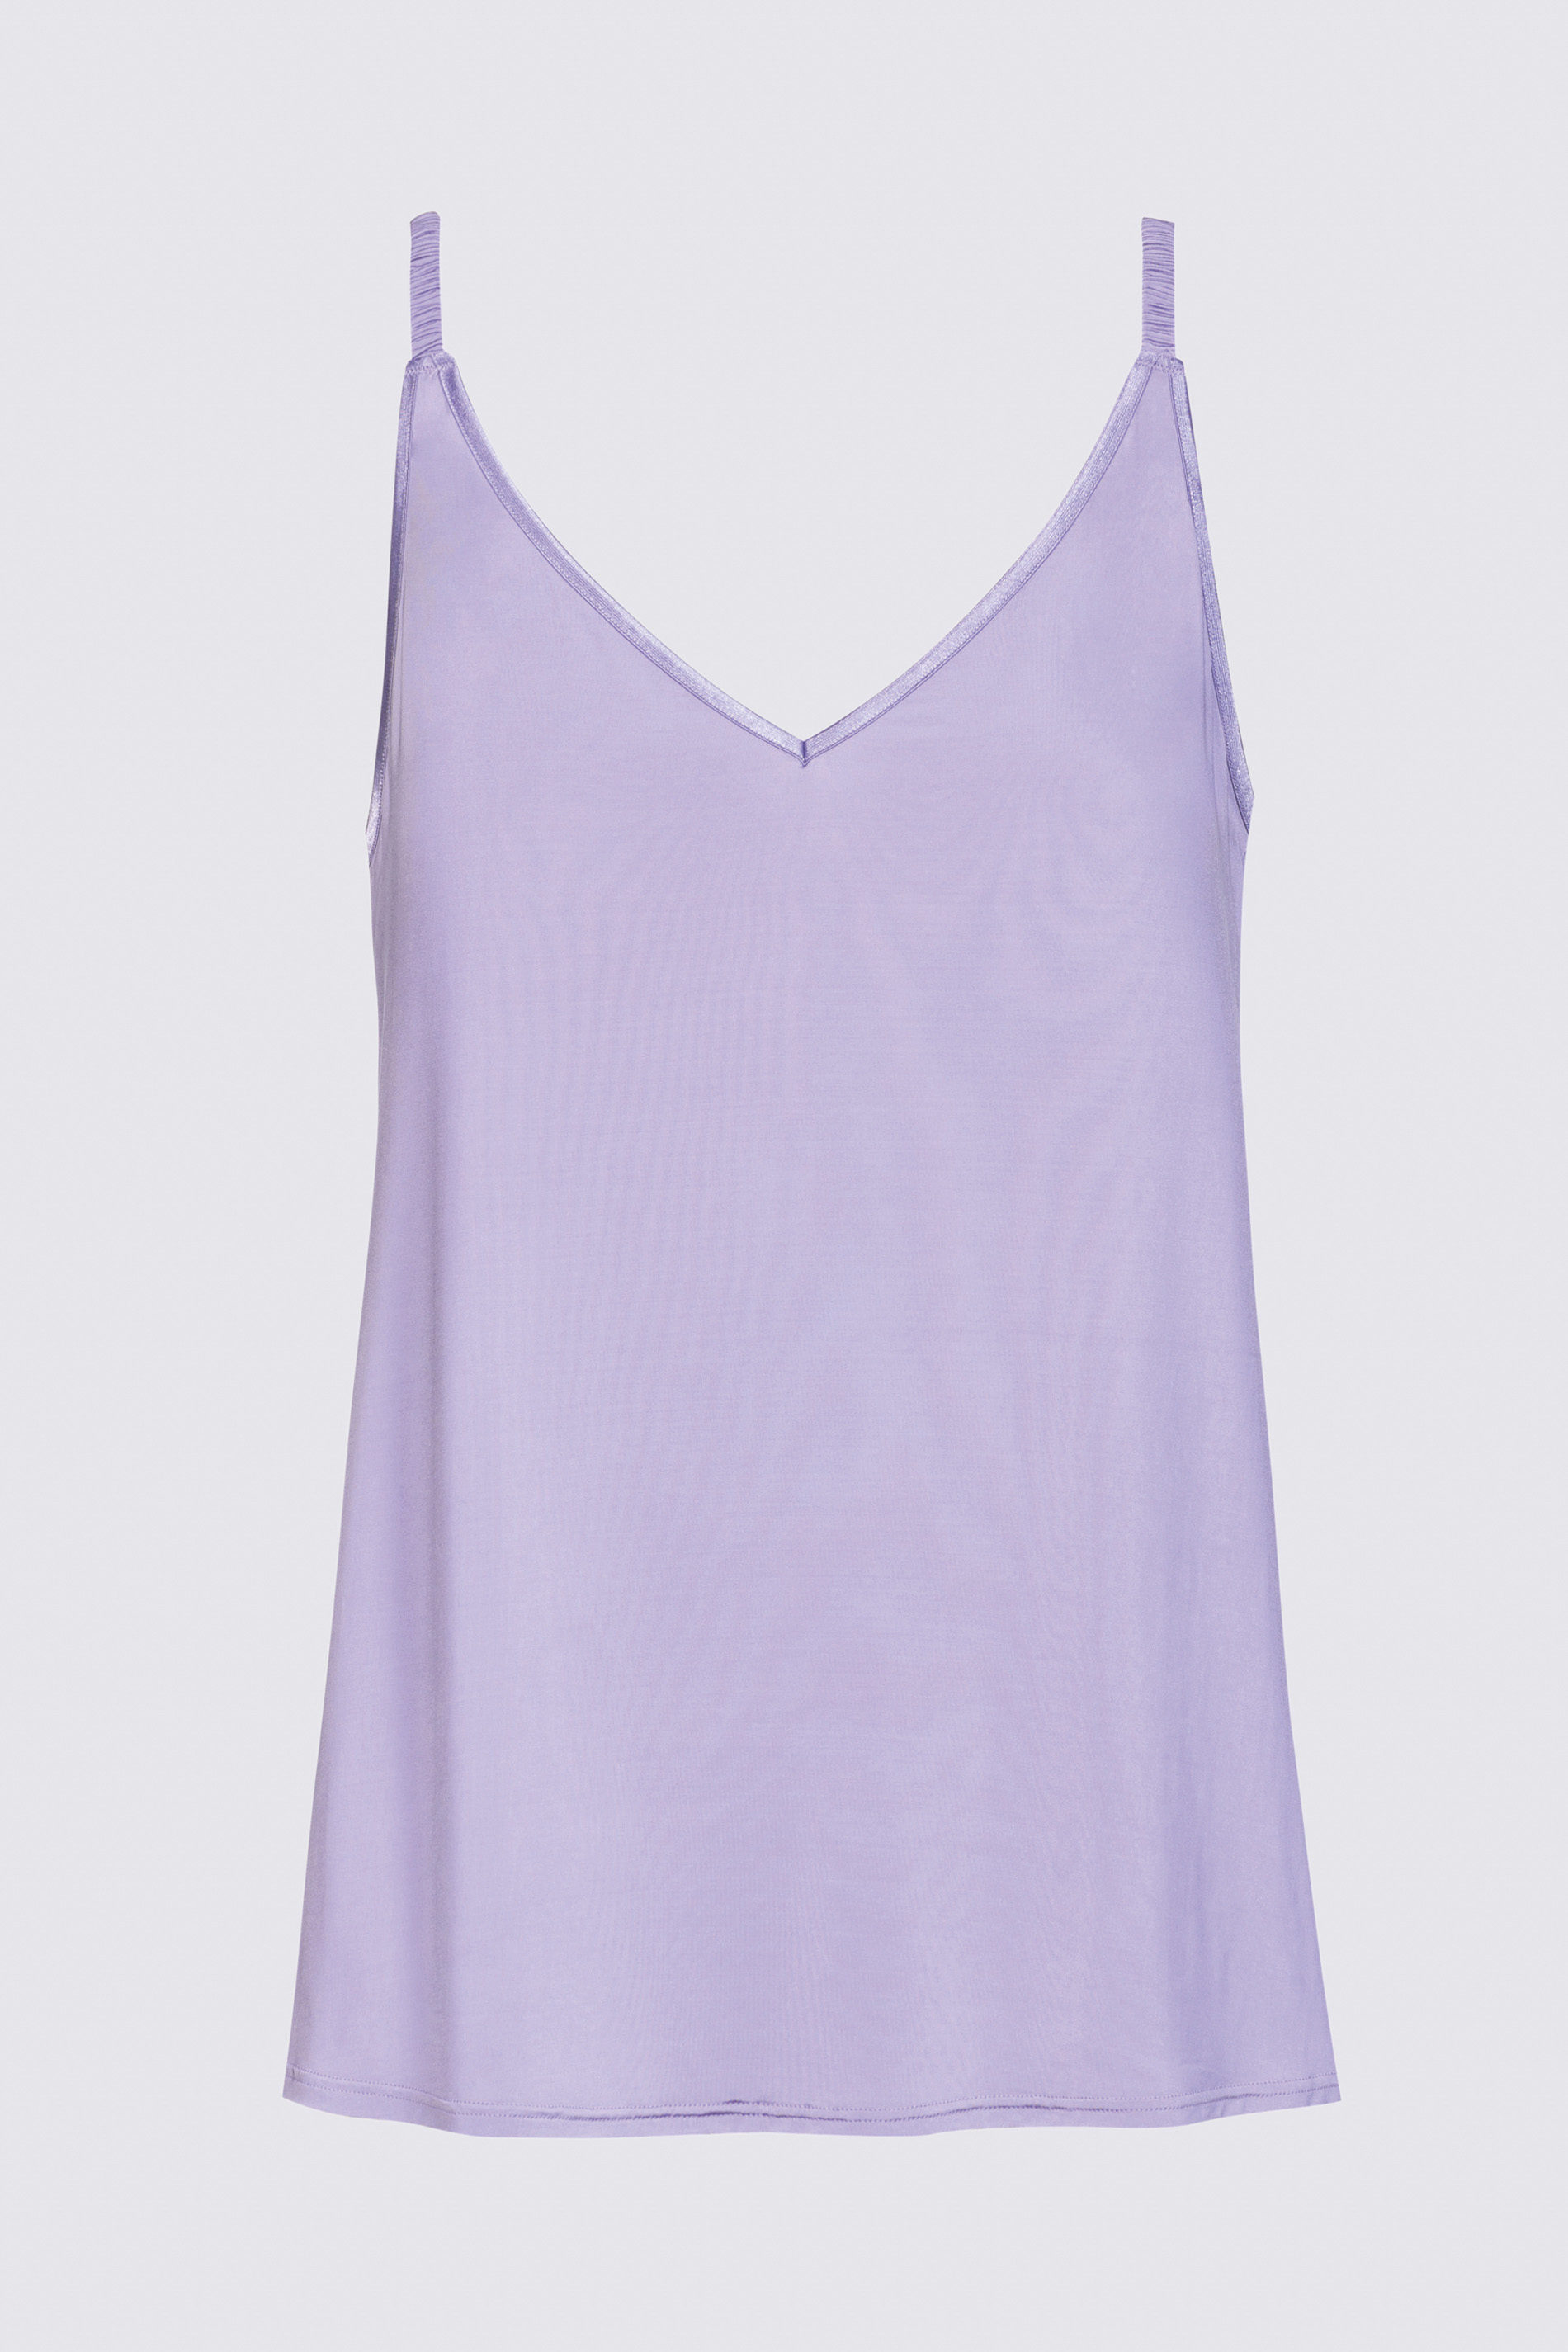 Camisol Lilac Serie Poetry Classy Freisteller | mey®